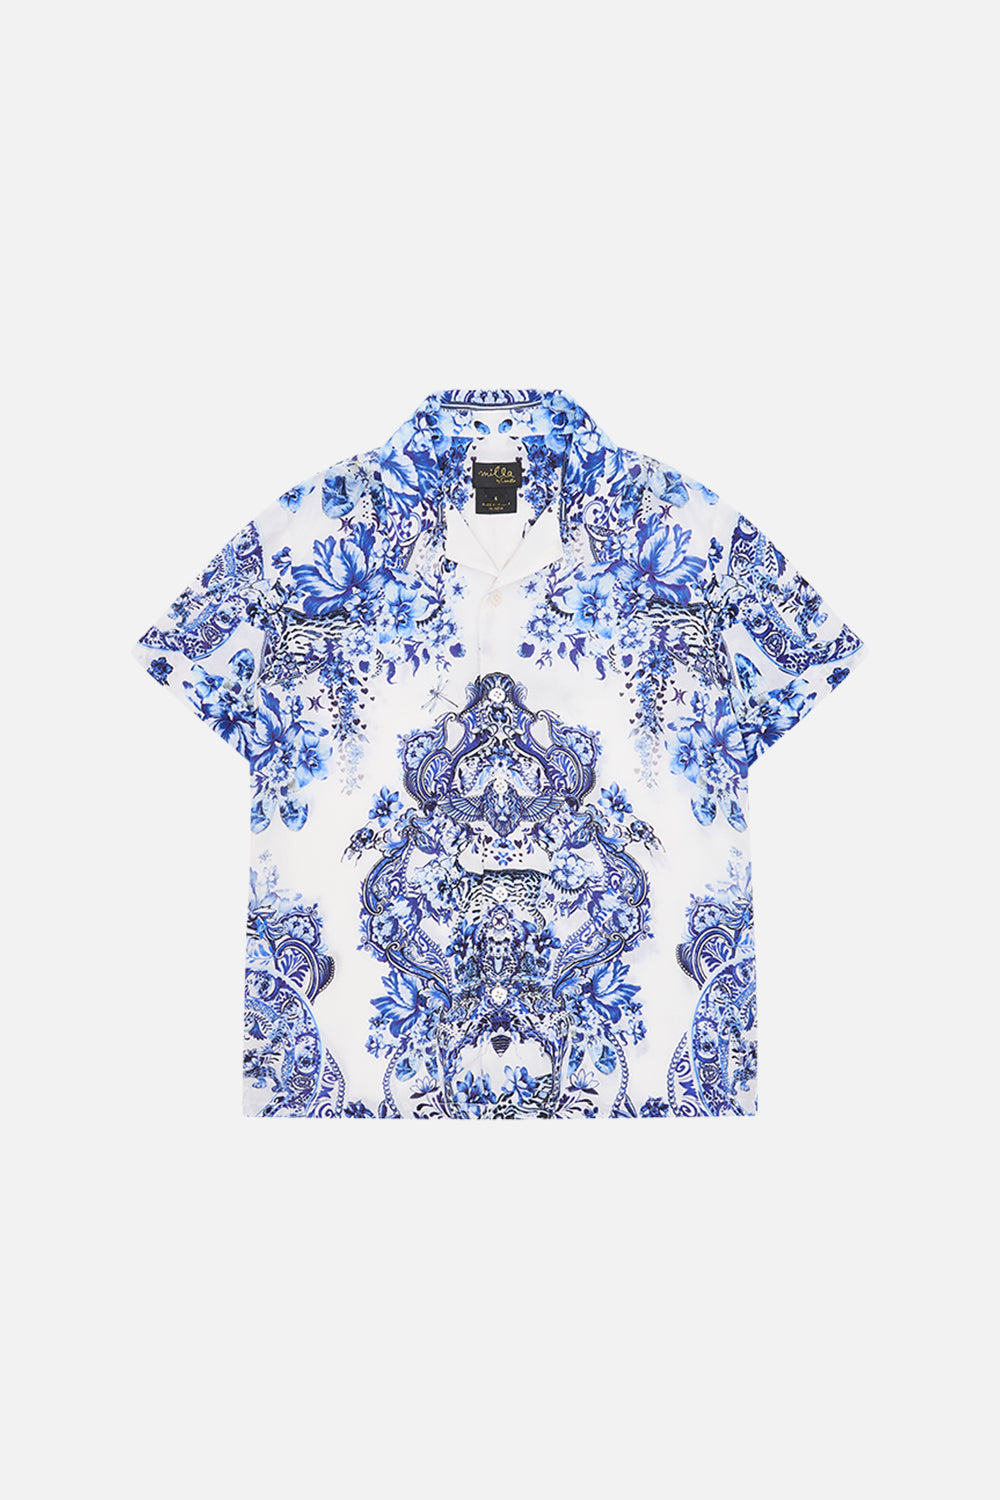 Front product view of Milla by CAMILL boys shirt sleeve shirt in Glaze and Graze print